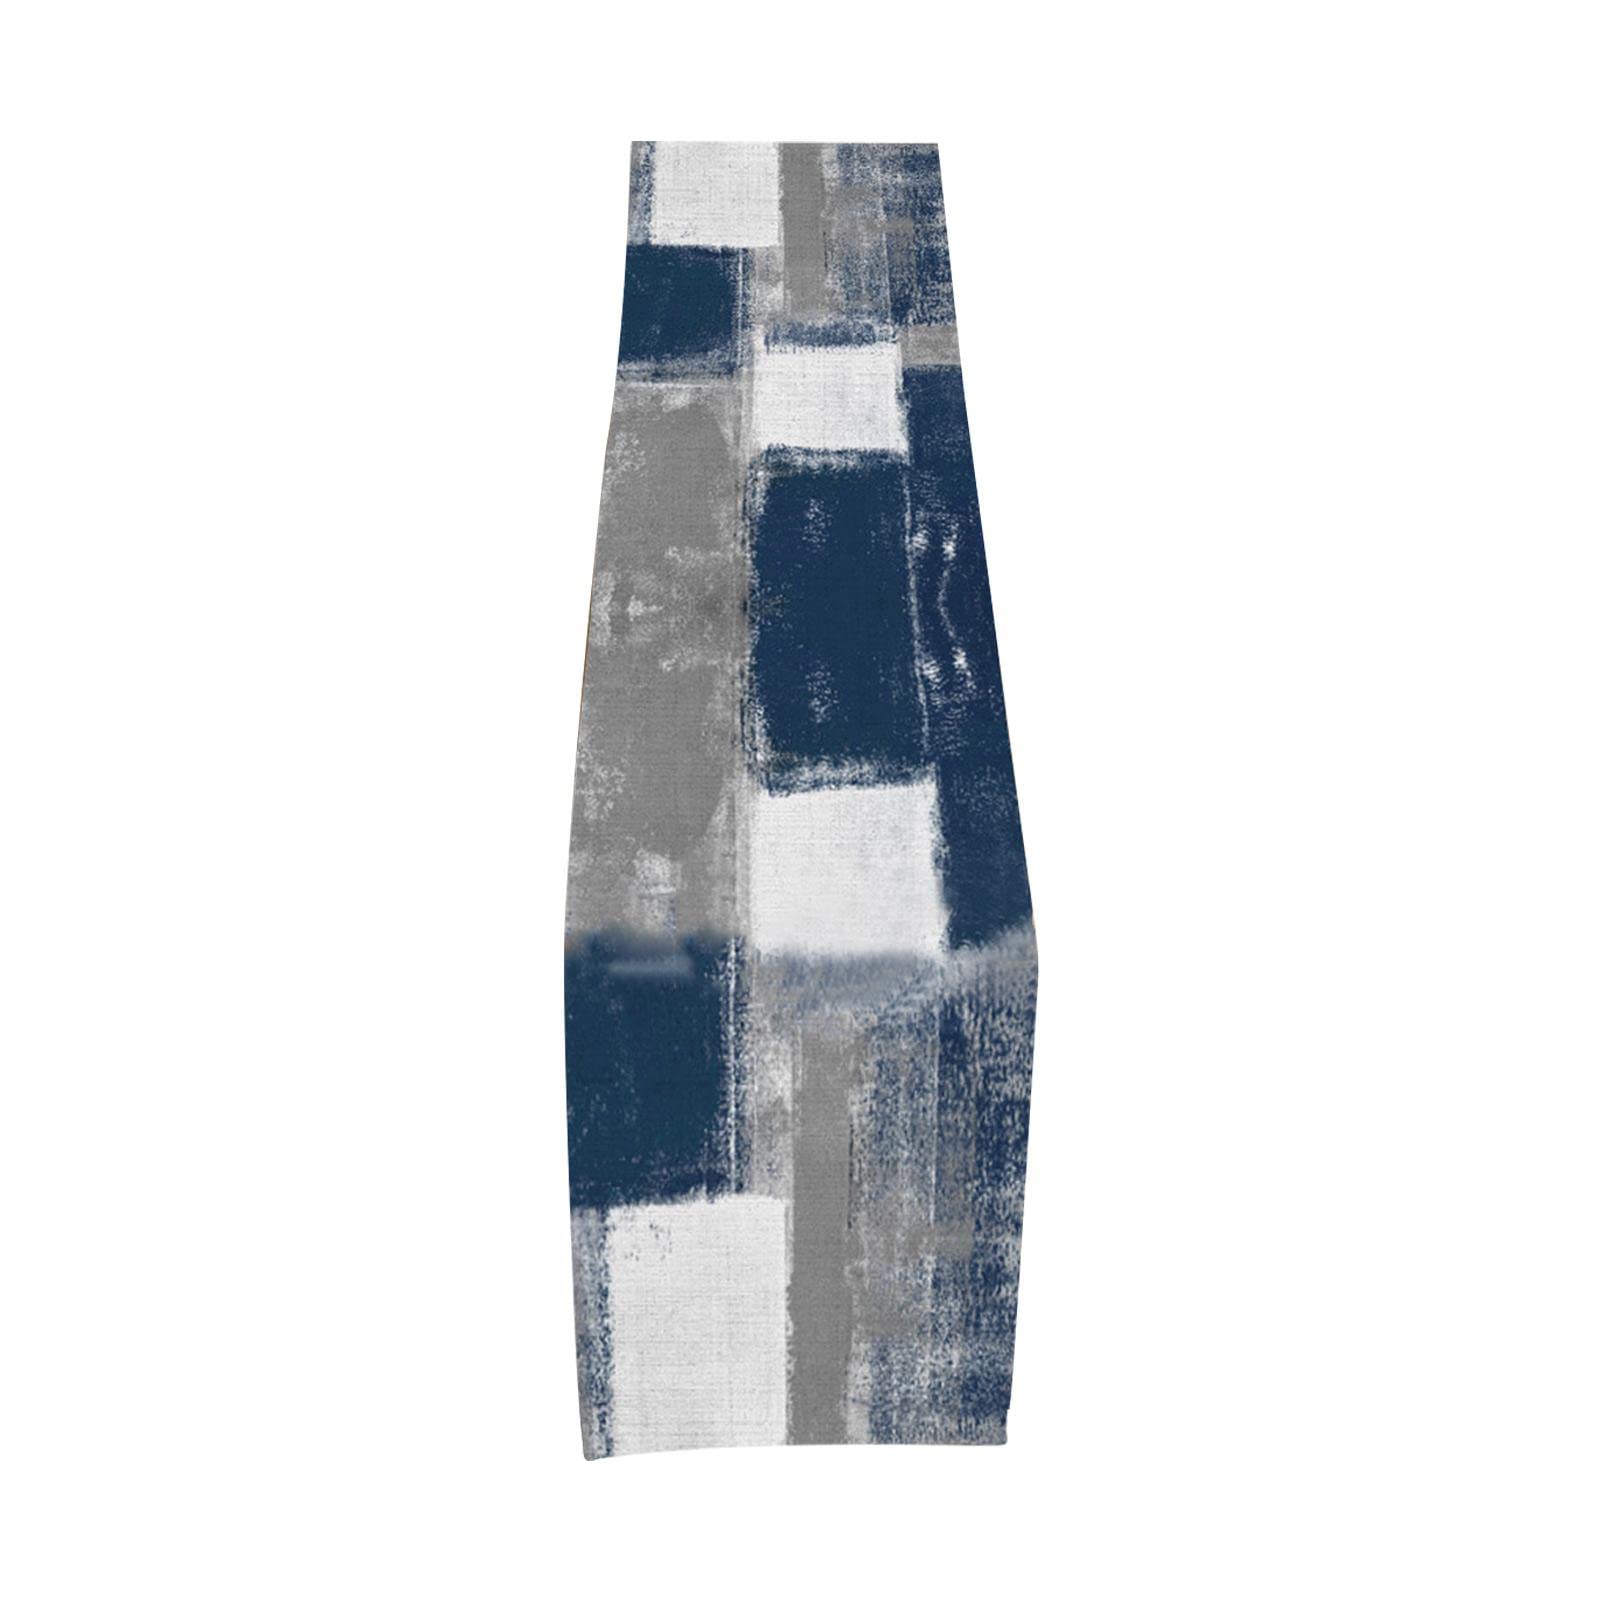 European Style Table Runner,Blue and Grey Table Runner,Farmhouse Abstract Art Painting Table Runners for Dinner Table Parties Holiday Decor